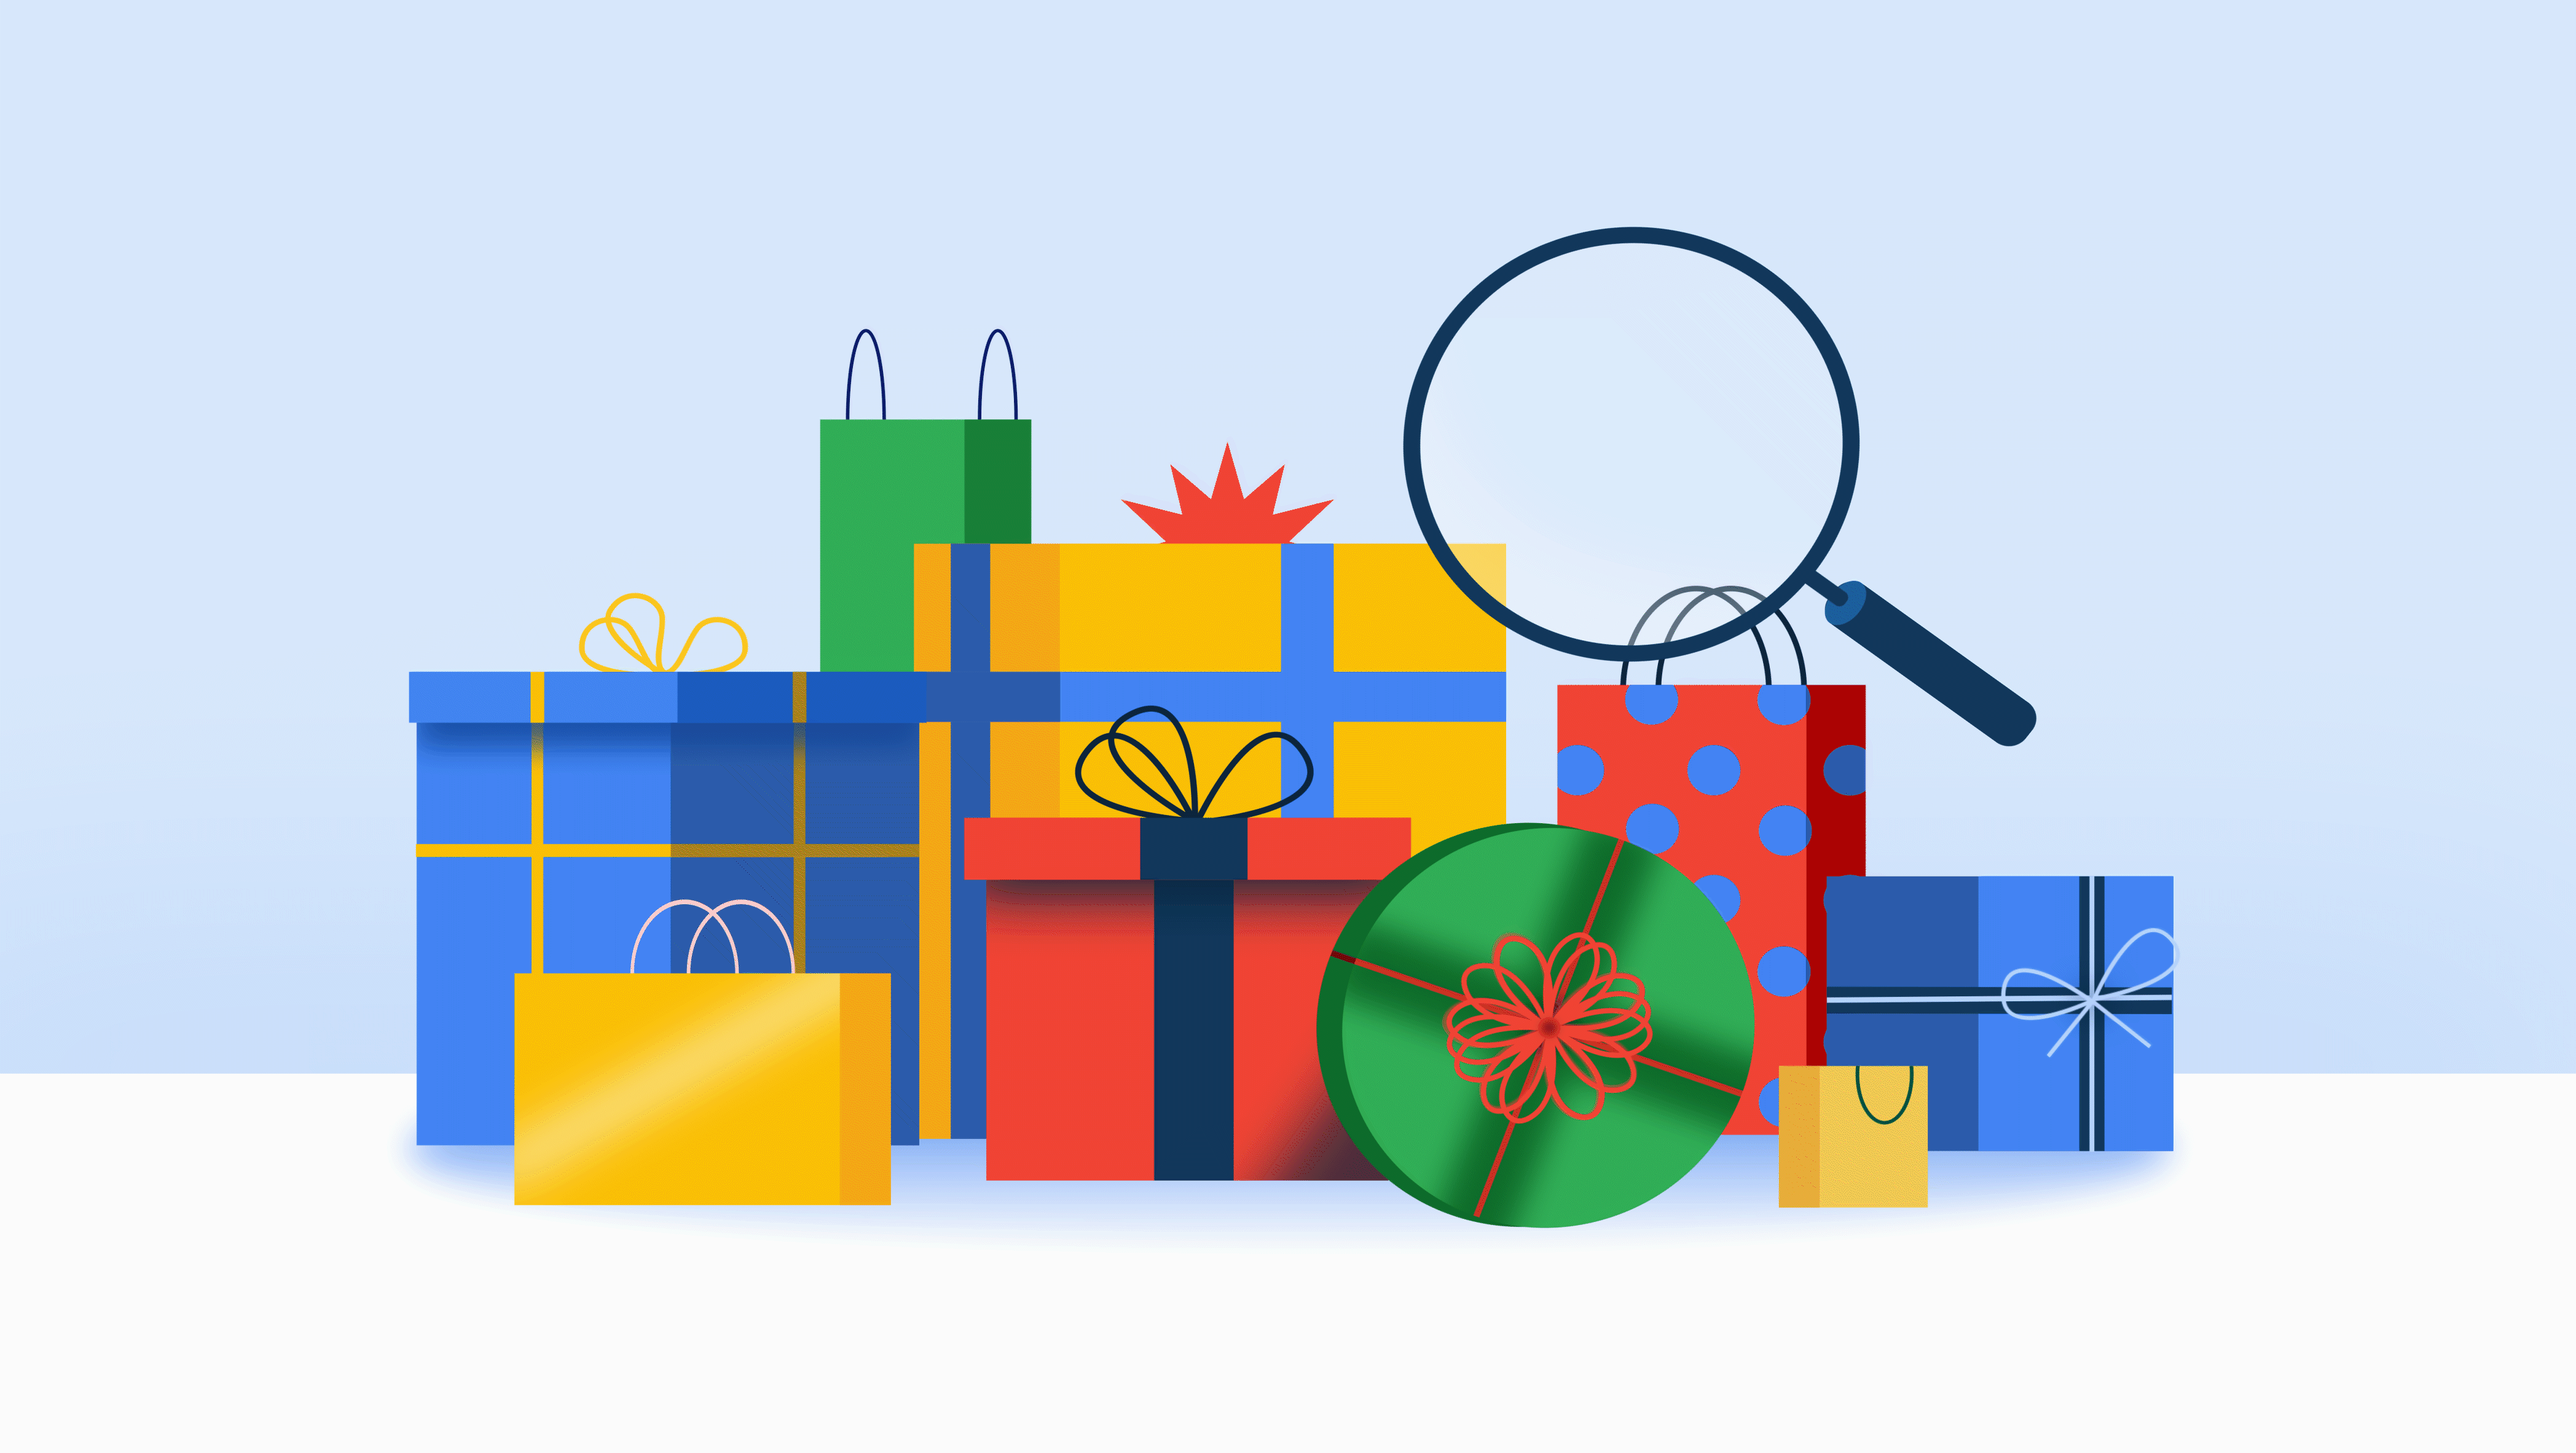 Google Shopping: Illustration of gifts wrapped up for holiday gift-giving